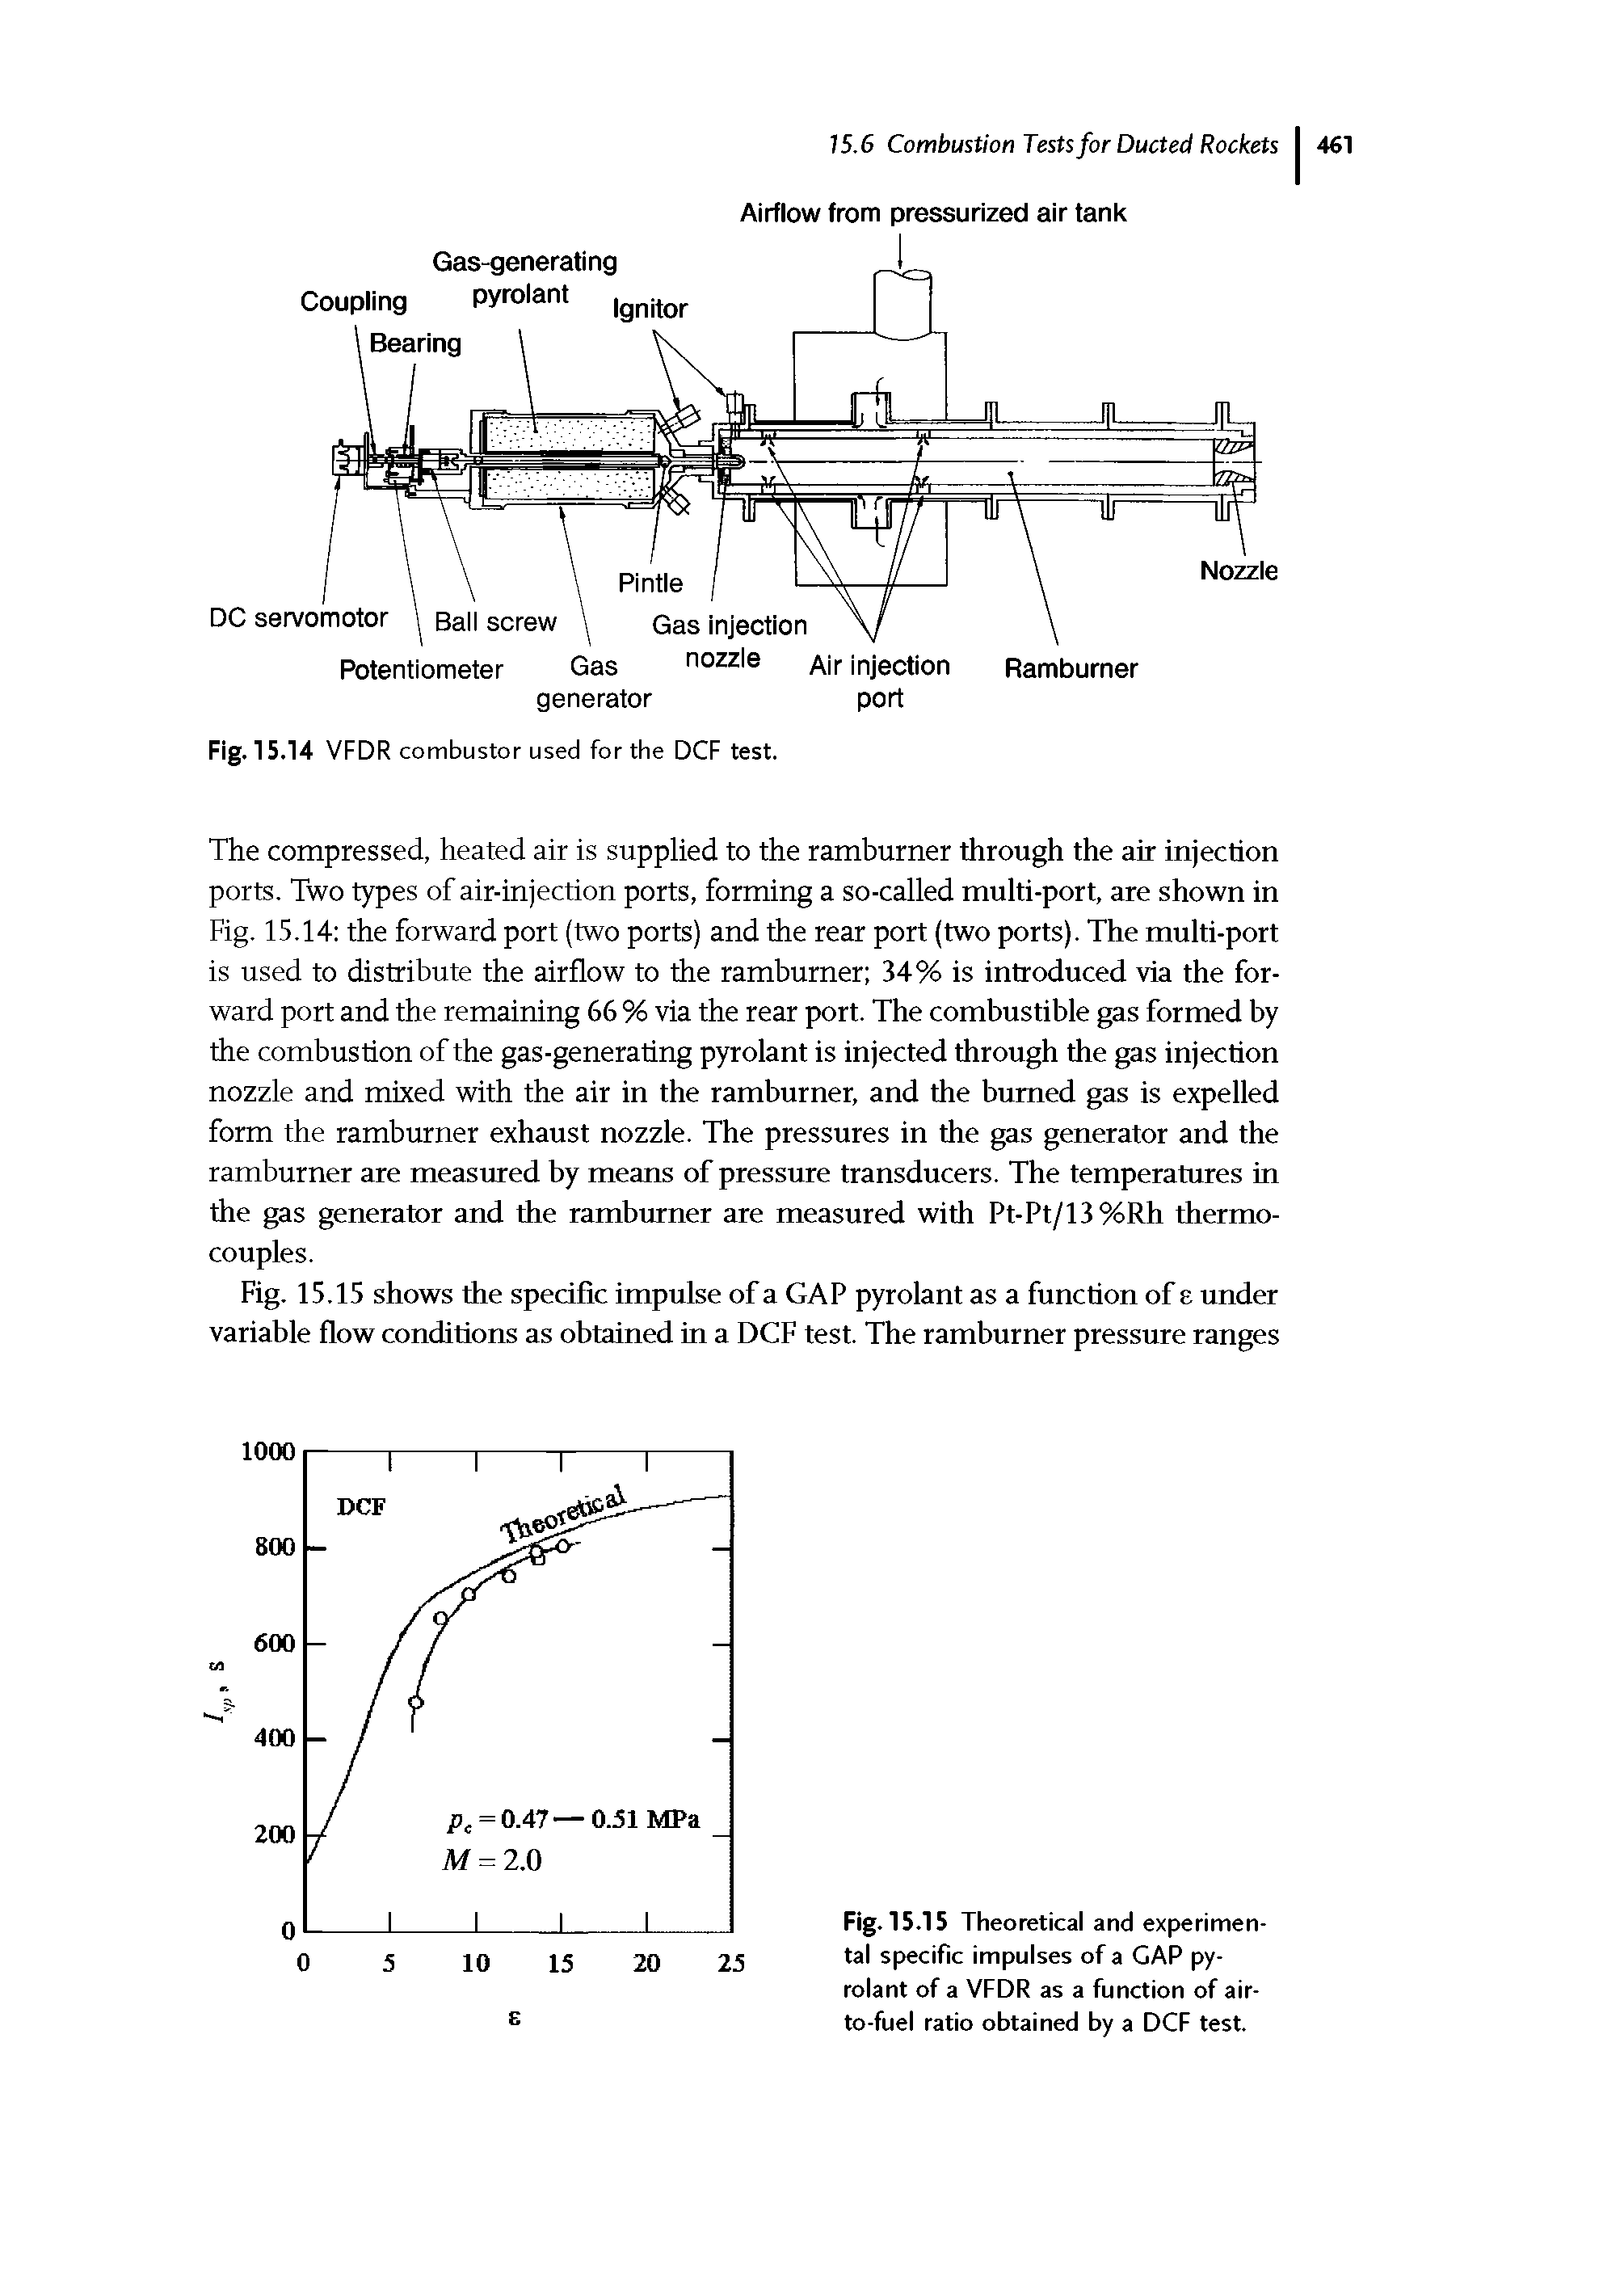 Fig. 15.15 Theoretical and experimental specific impulses of a GAP pyrolant of a VFDR as a function of air-to-fuel ratio obtained by a DCF test.